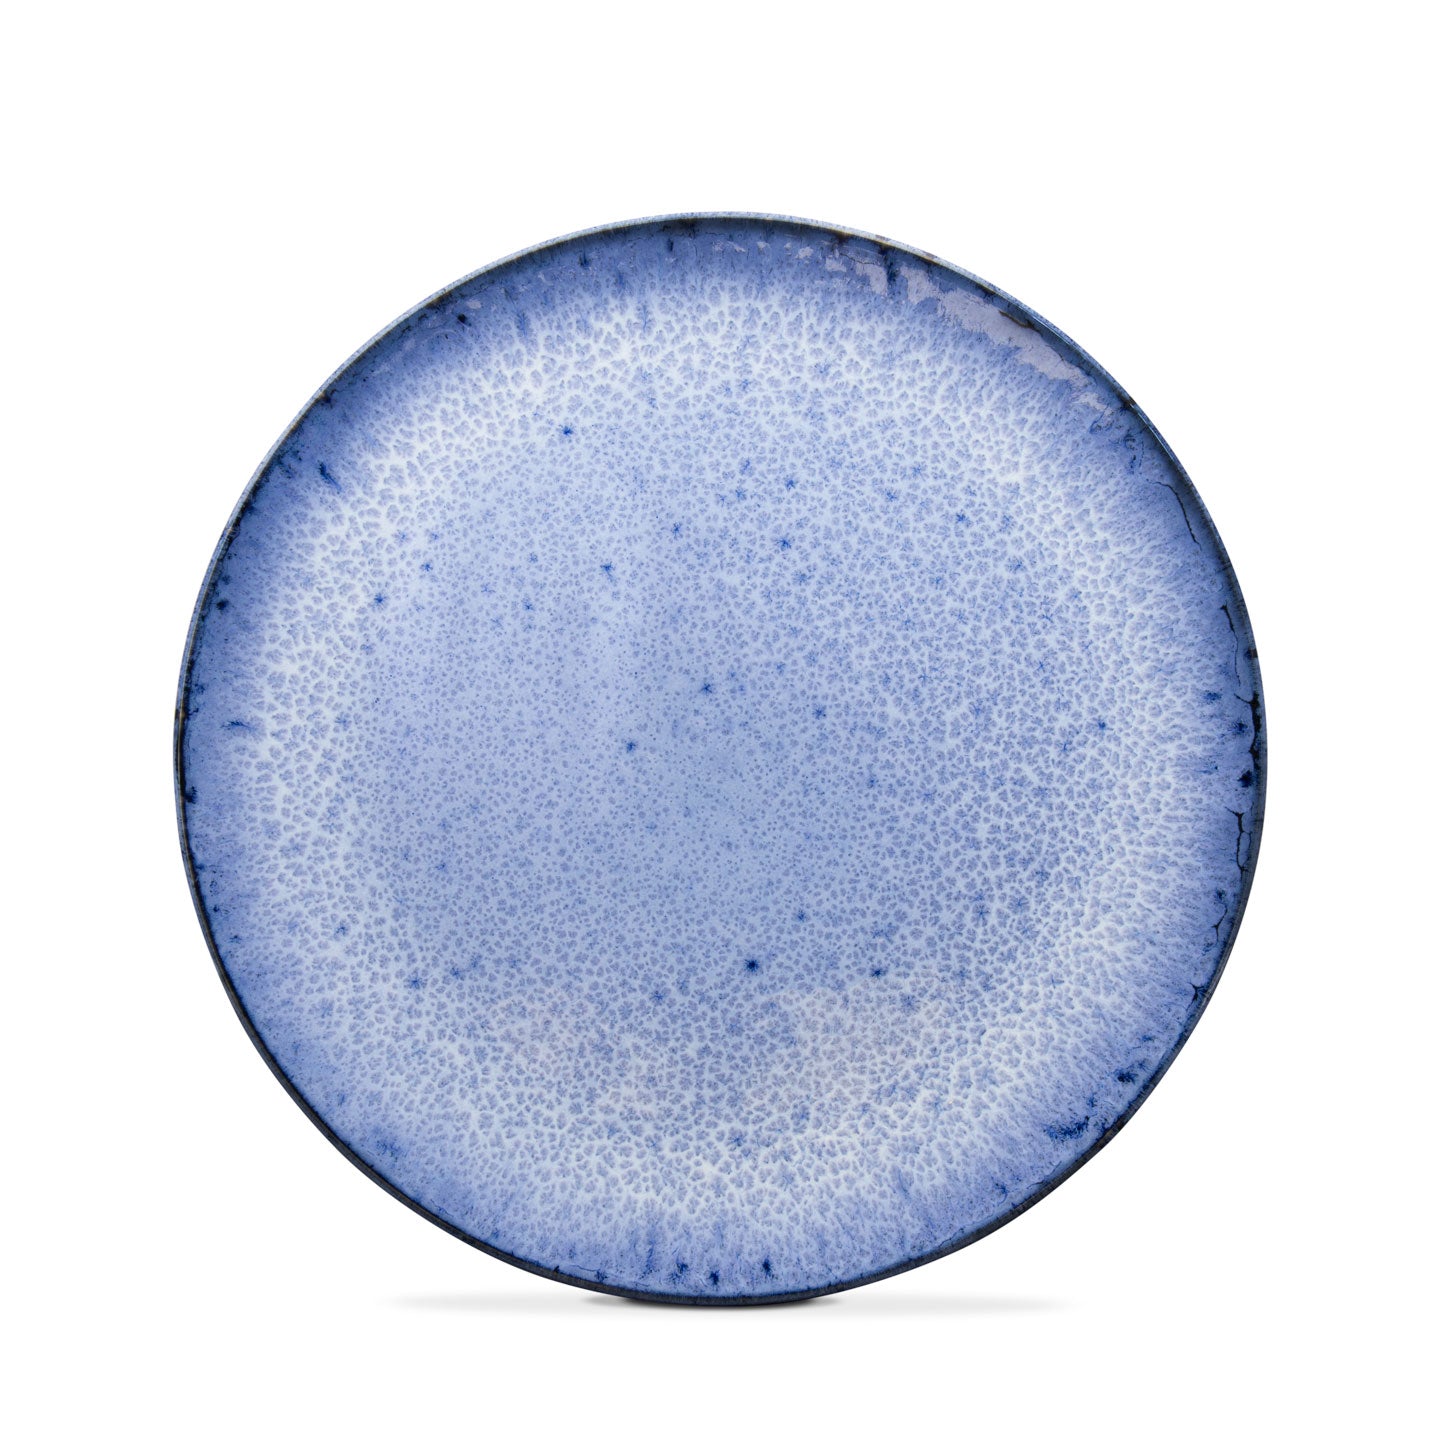 Blue pottery dish from Portugal